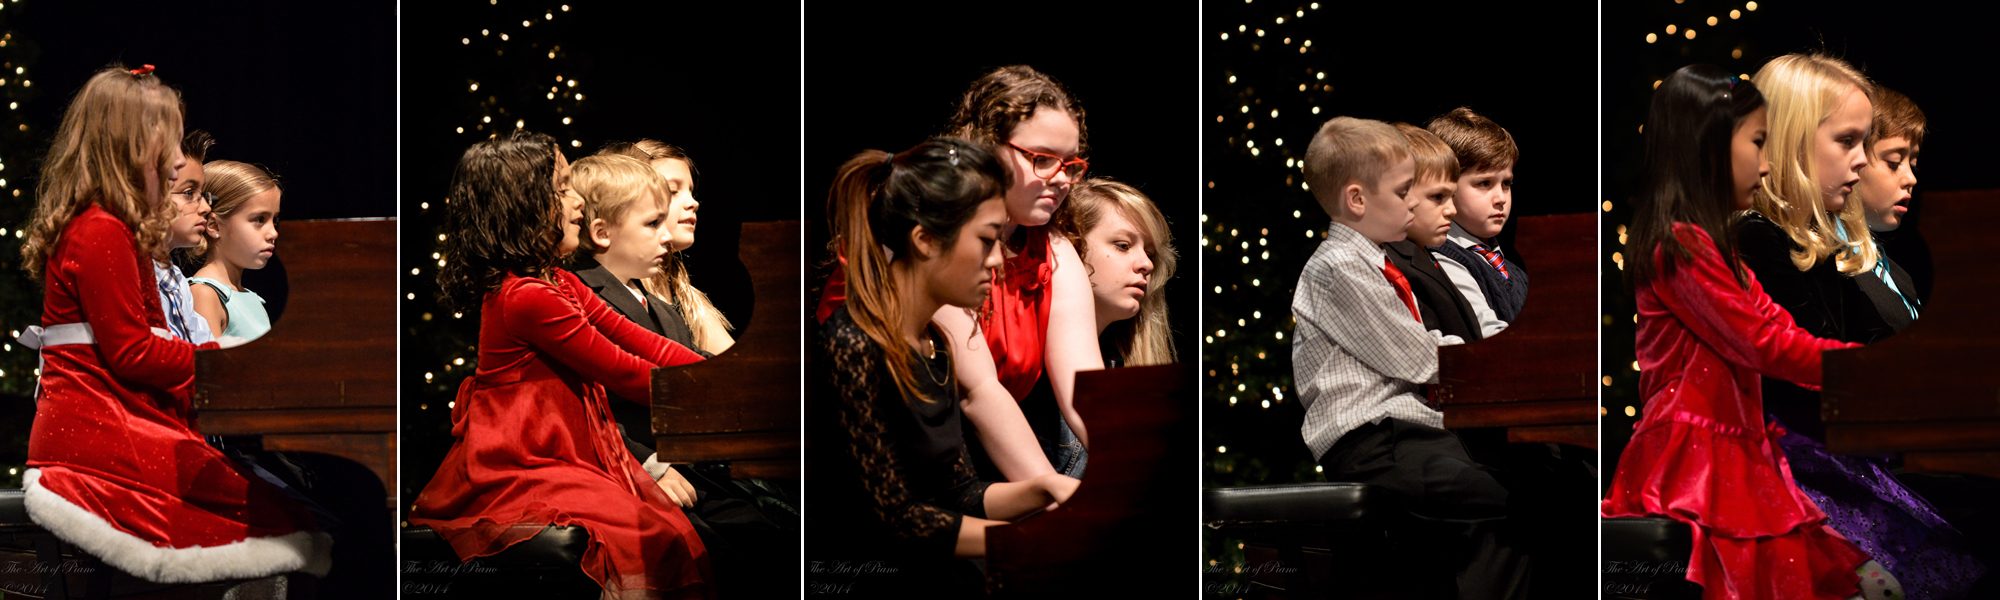 The Art of Piano student trios at the 2014 Winter Recital